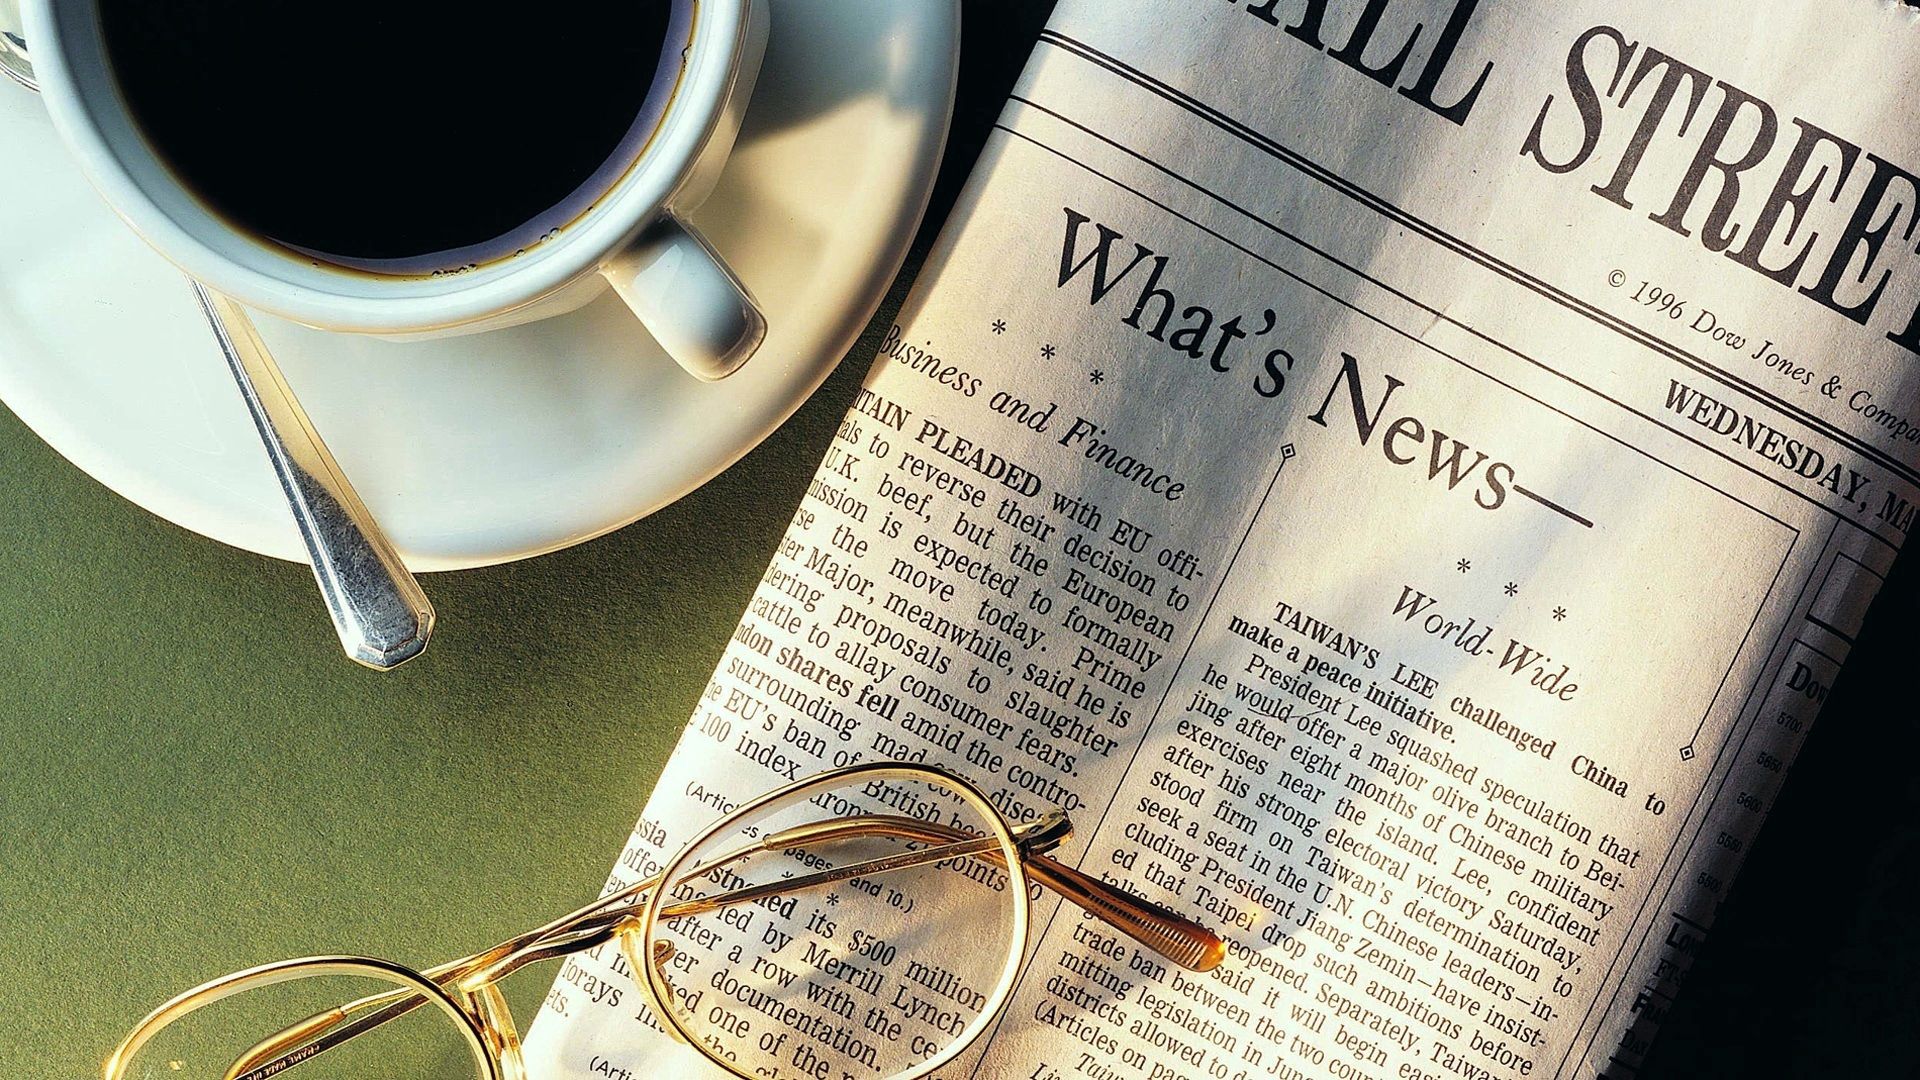 Windows Backgrounds coffee, food, cup, glasses, spectacles, newspaper, spoon, news, cup holder